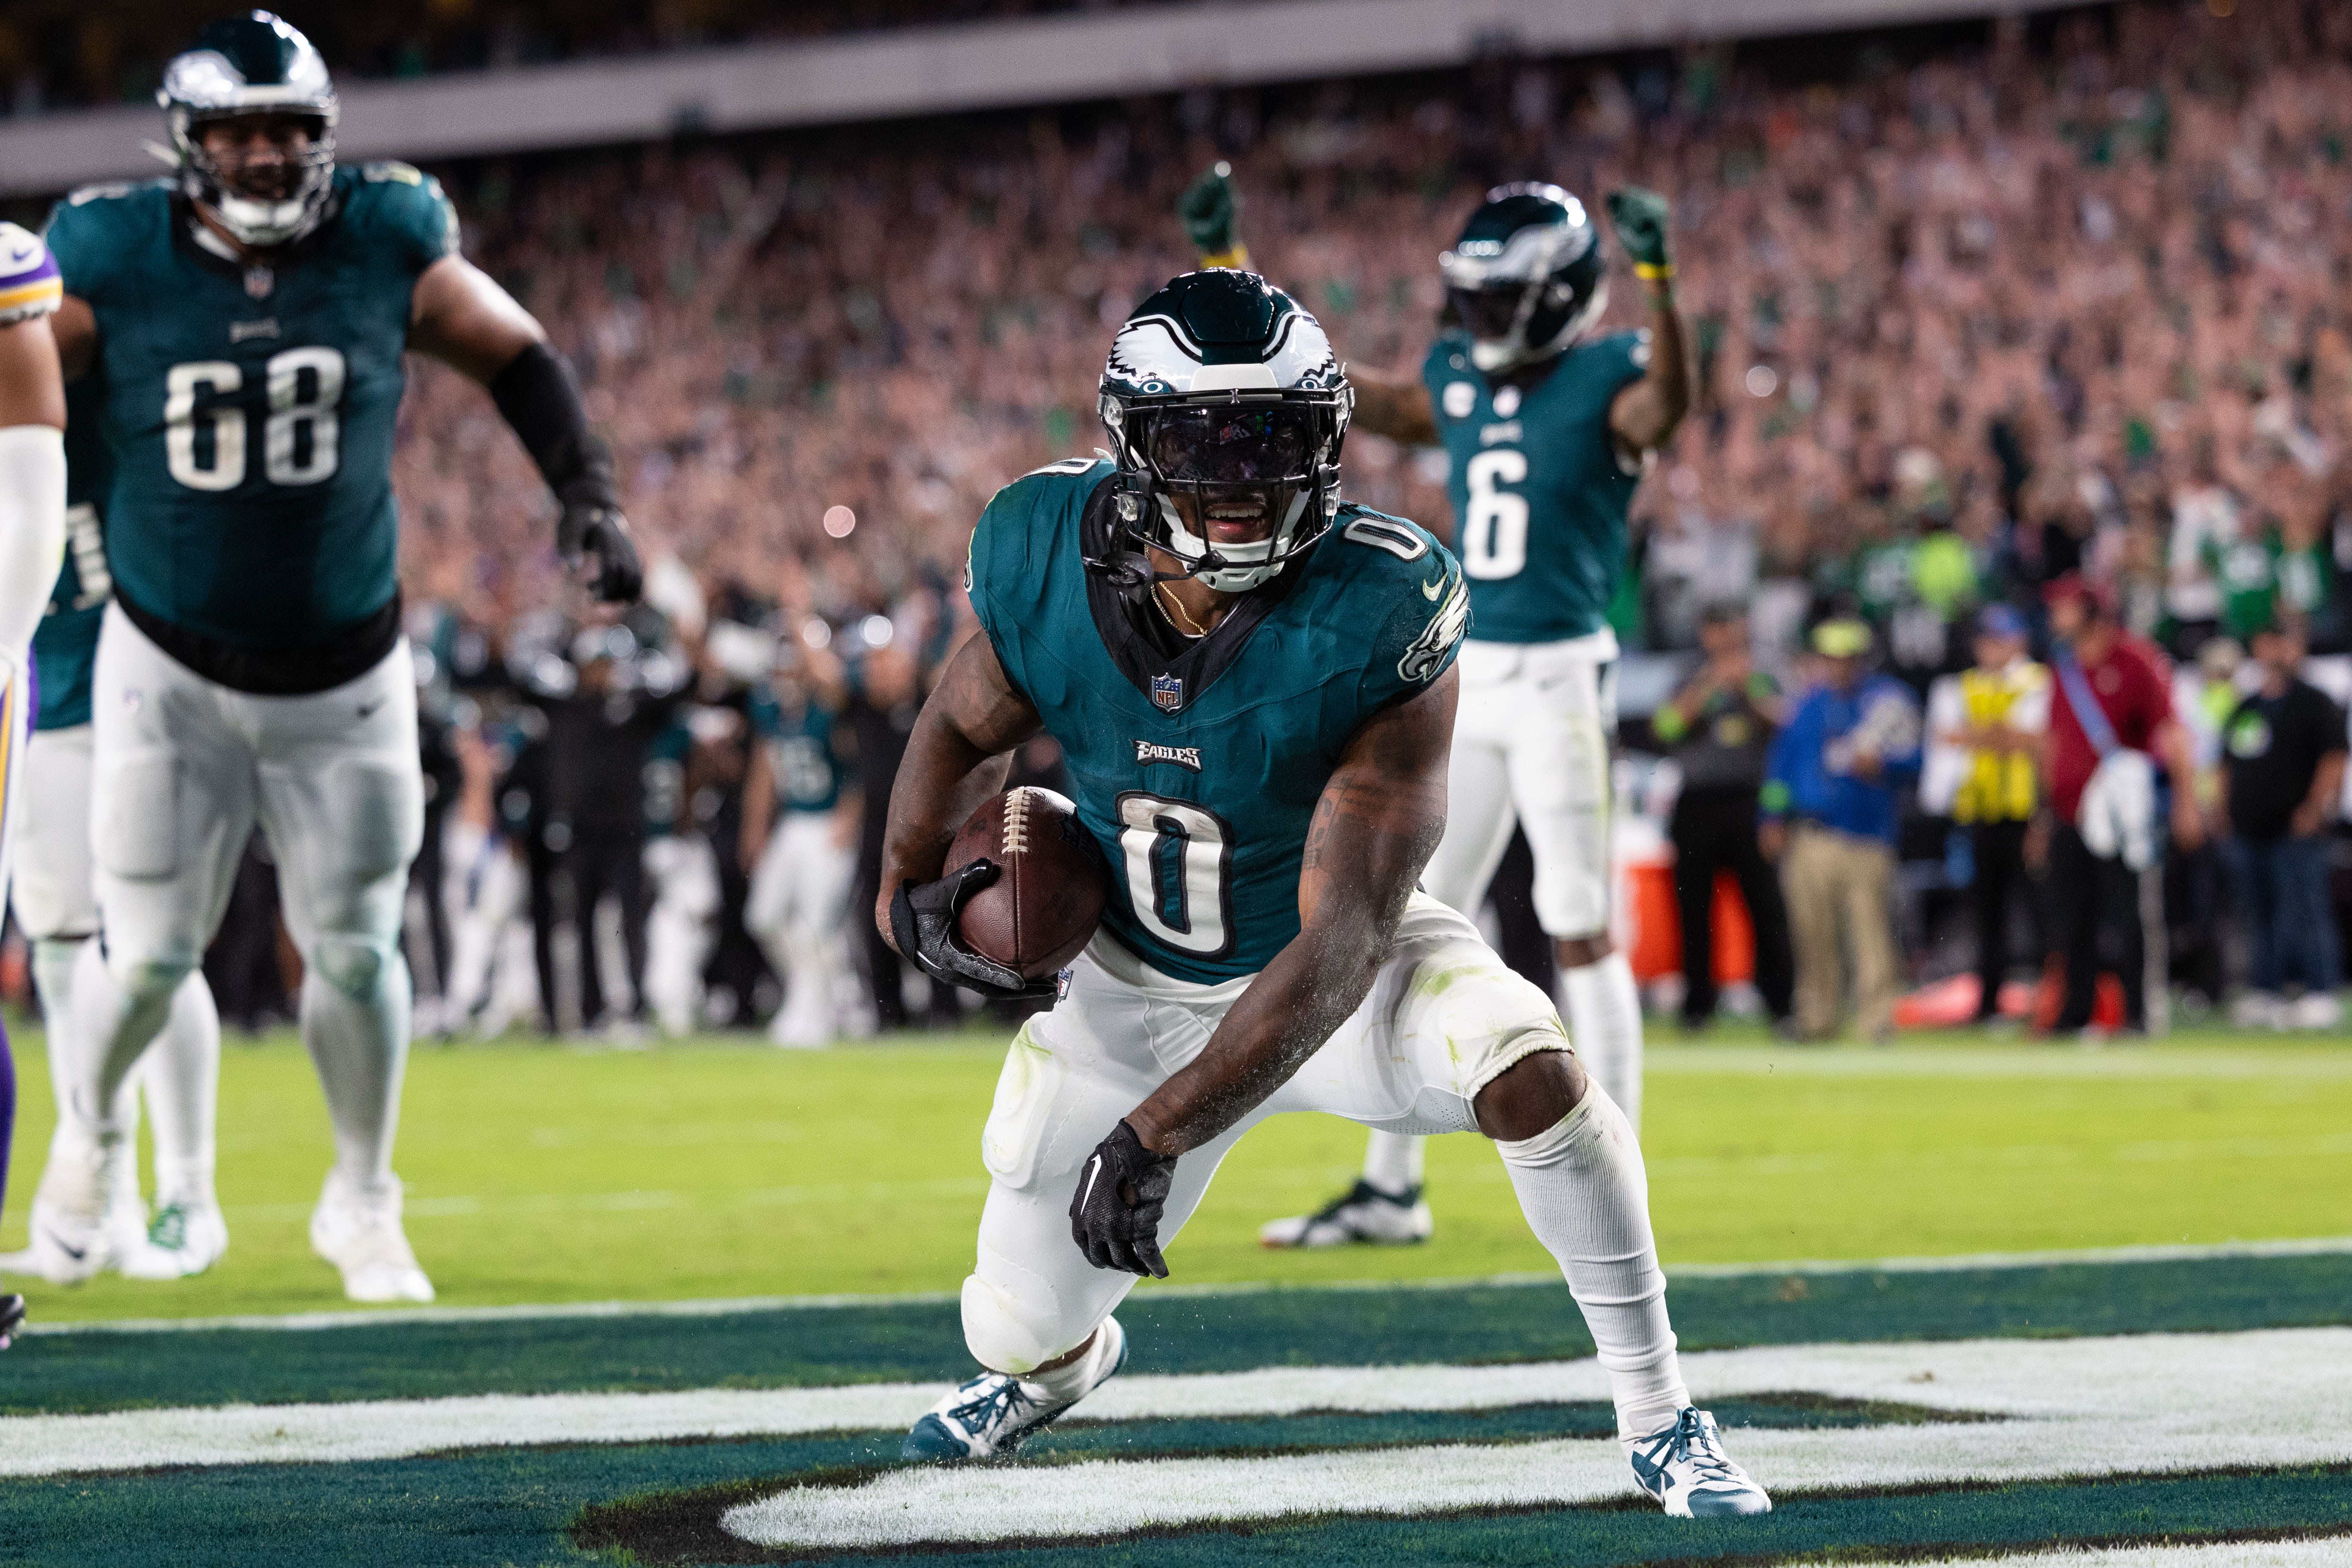 Eagles to face Buccaneers in wild card round of NFL playoffs – NBC